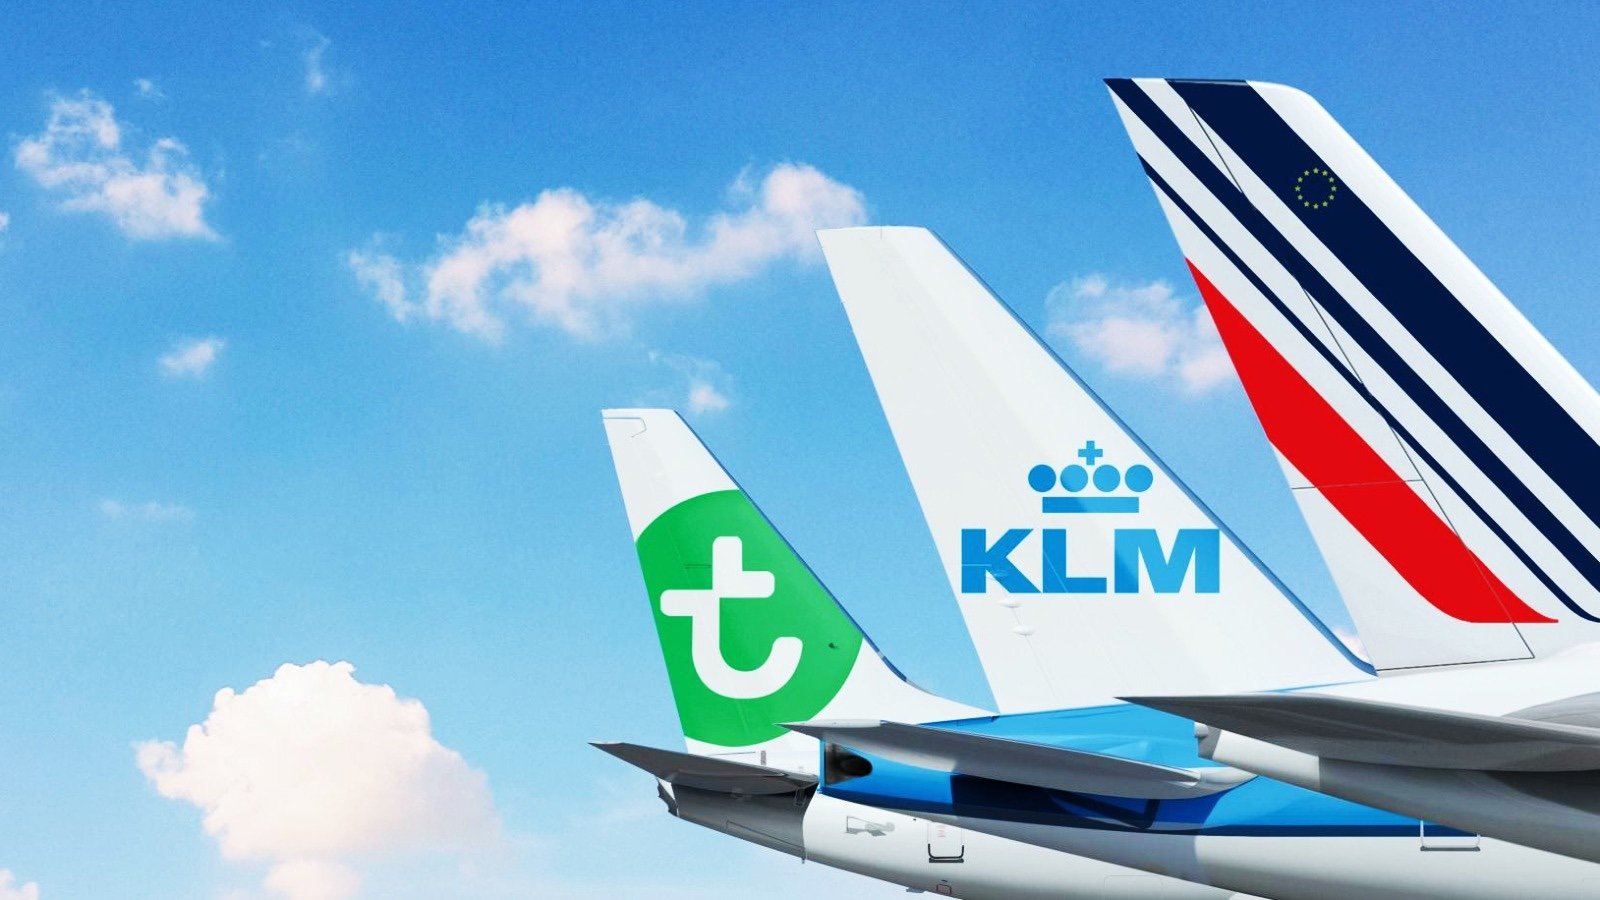 Air France and KLM notify customers of account hacks